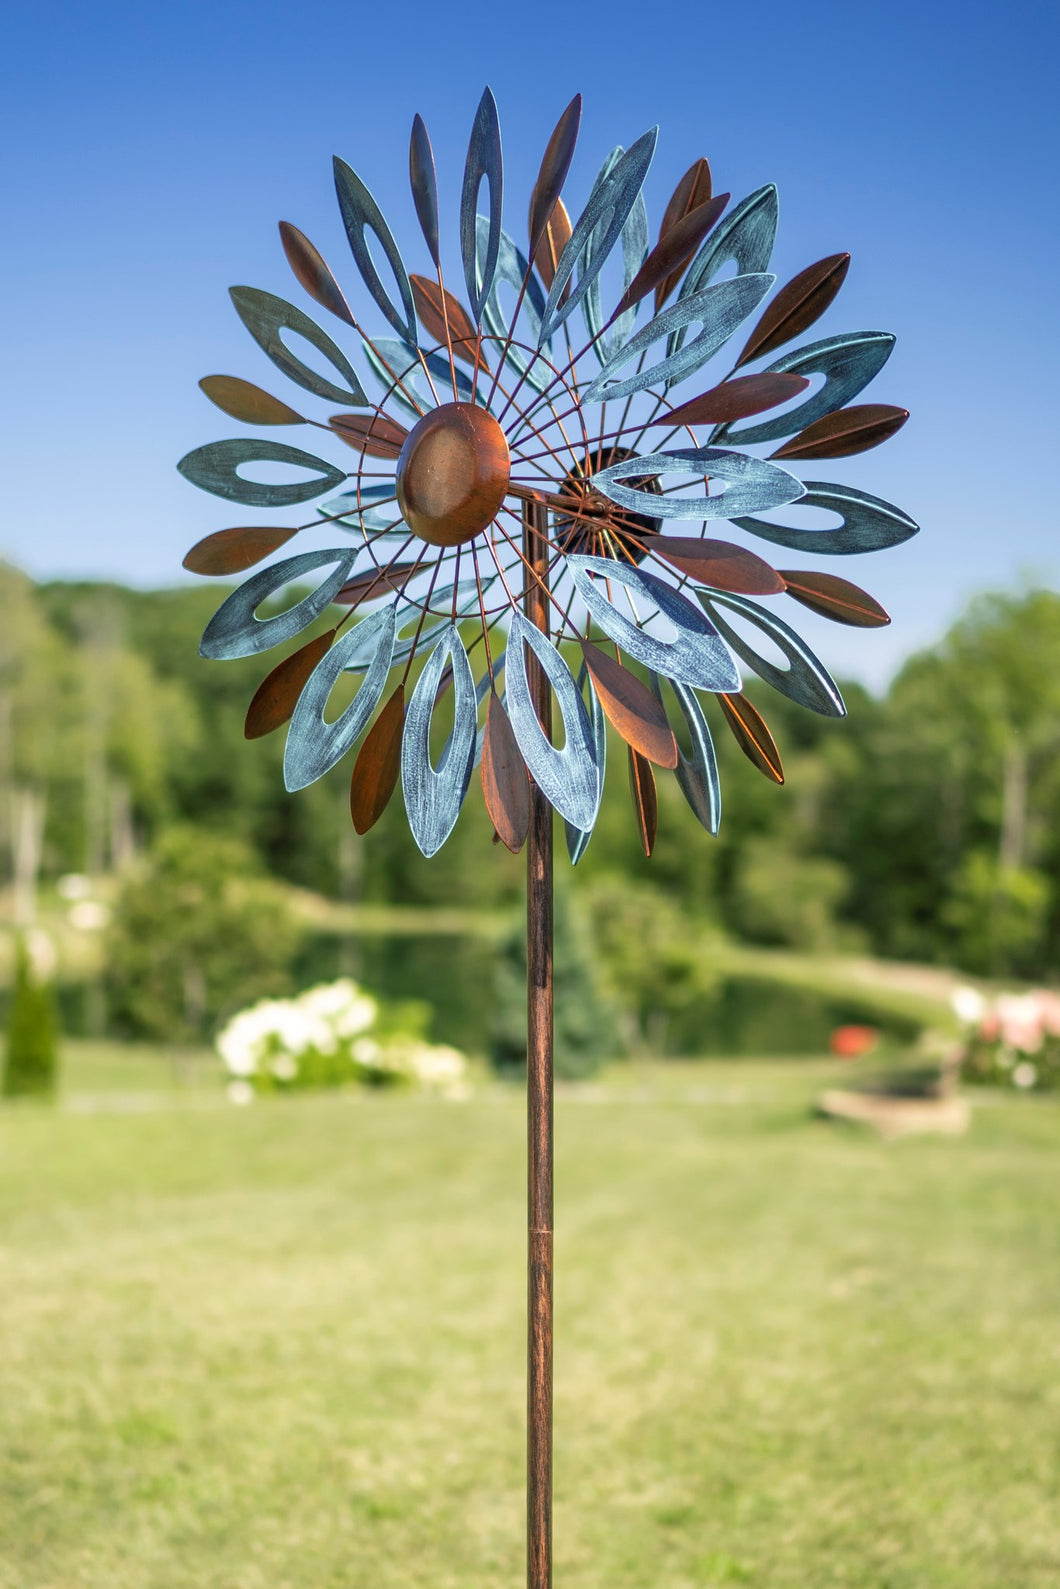 THIS NEW FOR 2021, WINDSLOW, 6’ TALL BY 24” WIDE, KINETIC WIND SPINNER IS PAINTED WITH METALLIC AUTOMOBILE PAINT TO REDUCE FADING AND PEELING. LIGHT BLUE LEAVES ALTERNATE WITH THE COPPER LEAVES. THE BLADES TURN IN 2 DIFFERENT DIRECTIONS. IT IS METAL CONSTRUCTION WITH SOME ASSEMBLY REQUIRED. THIS WILL BE DELIVERED BY UPS GROUND.